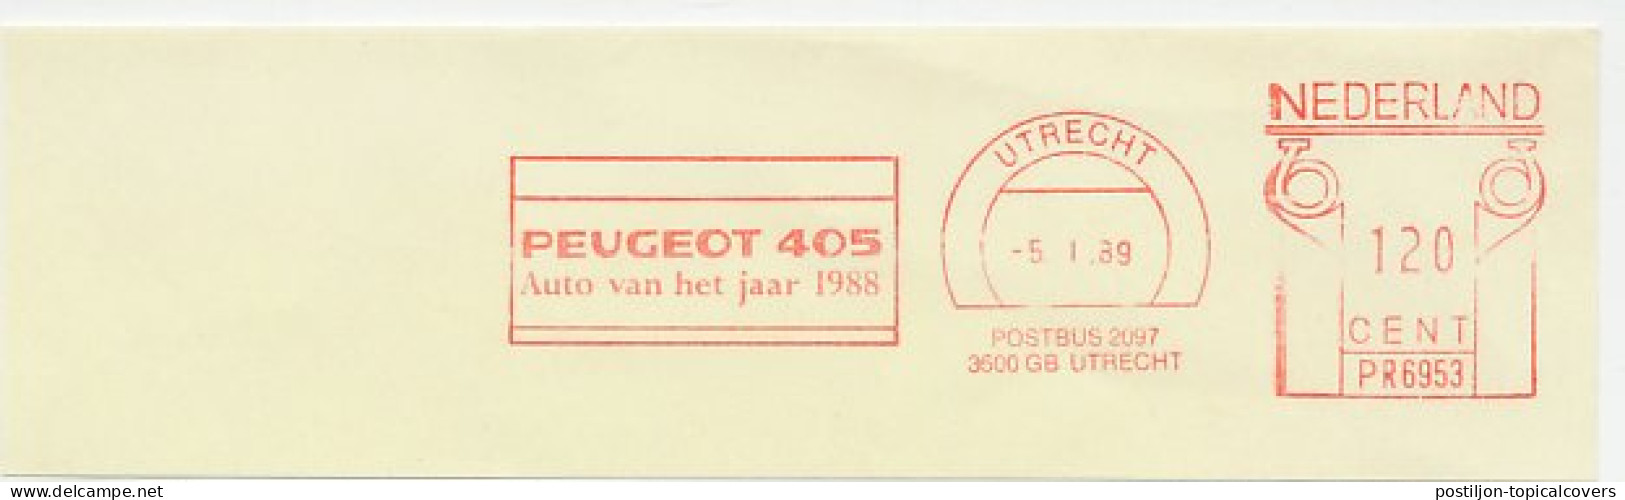 Meter Cut Netherlands 1989 Car - Peugeot 405 - Car Of The Year 1988 - Voitures